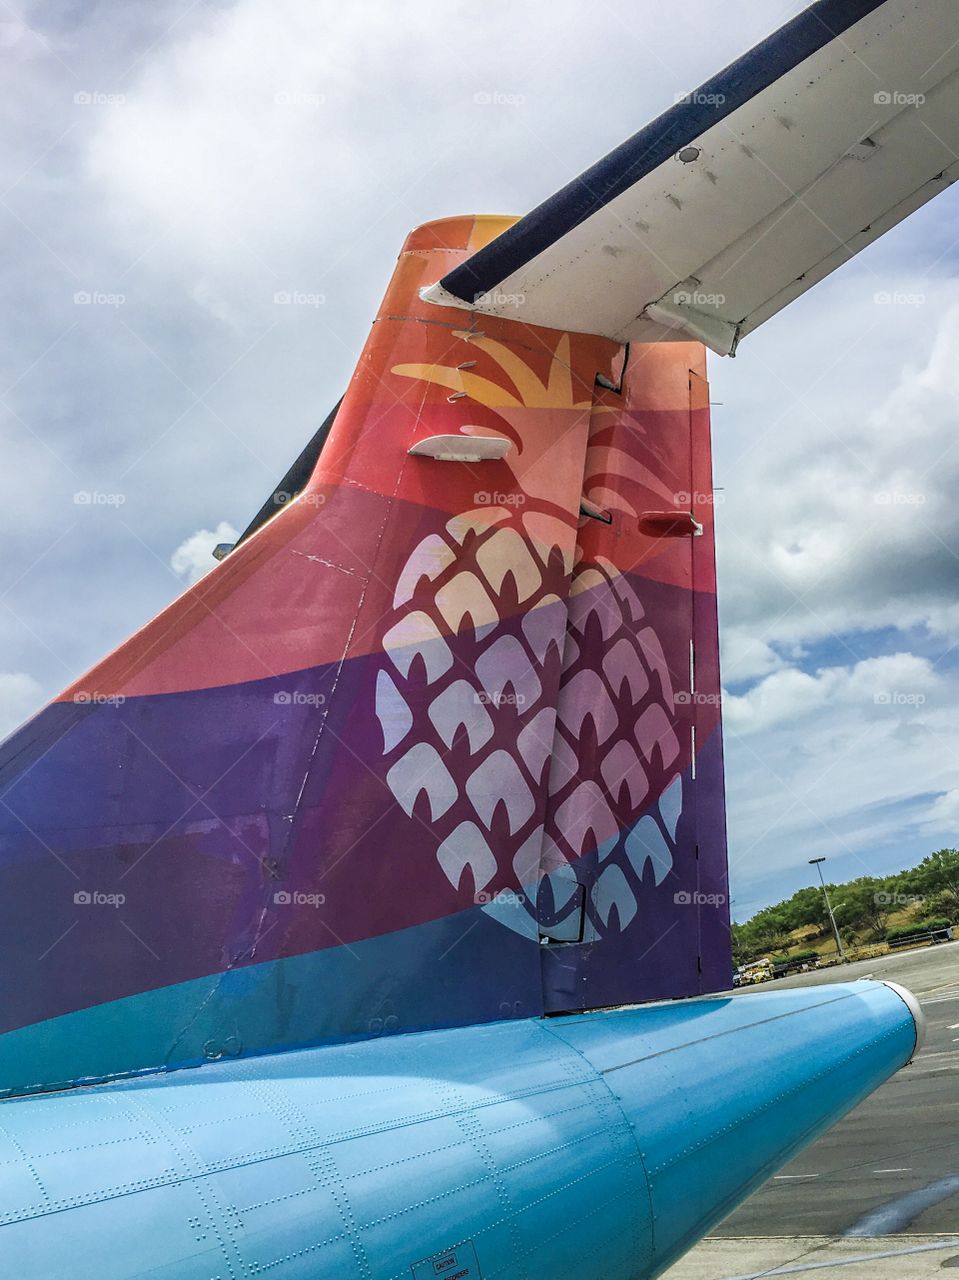 Pineapple on the tail of an Island Air plane in Hawaii. 